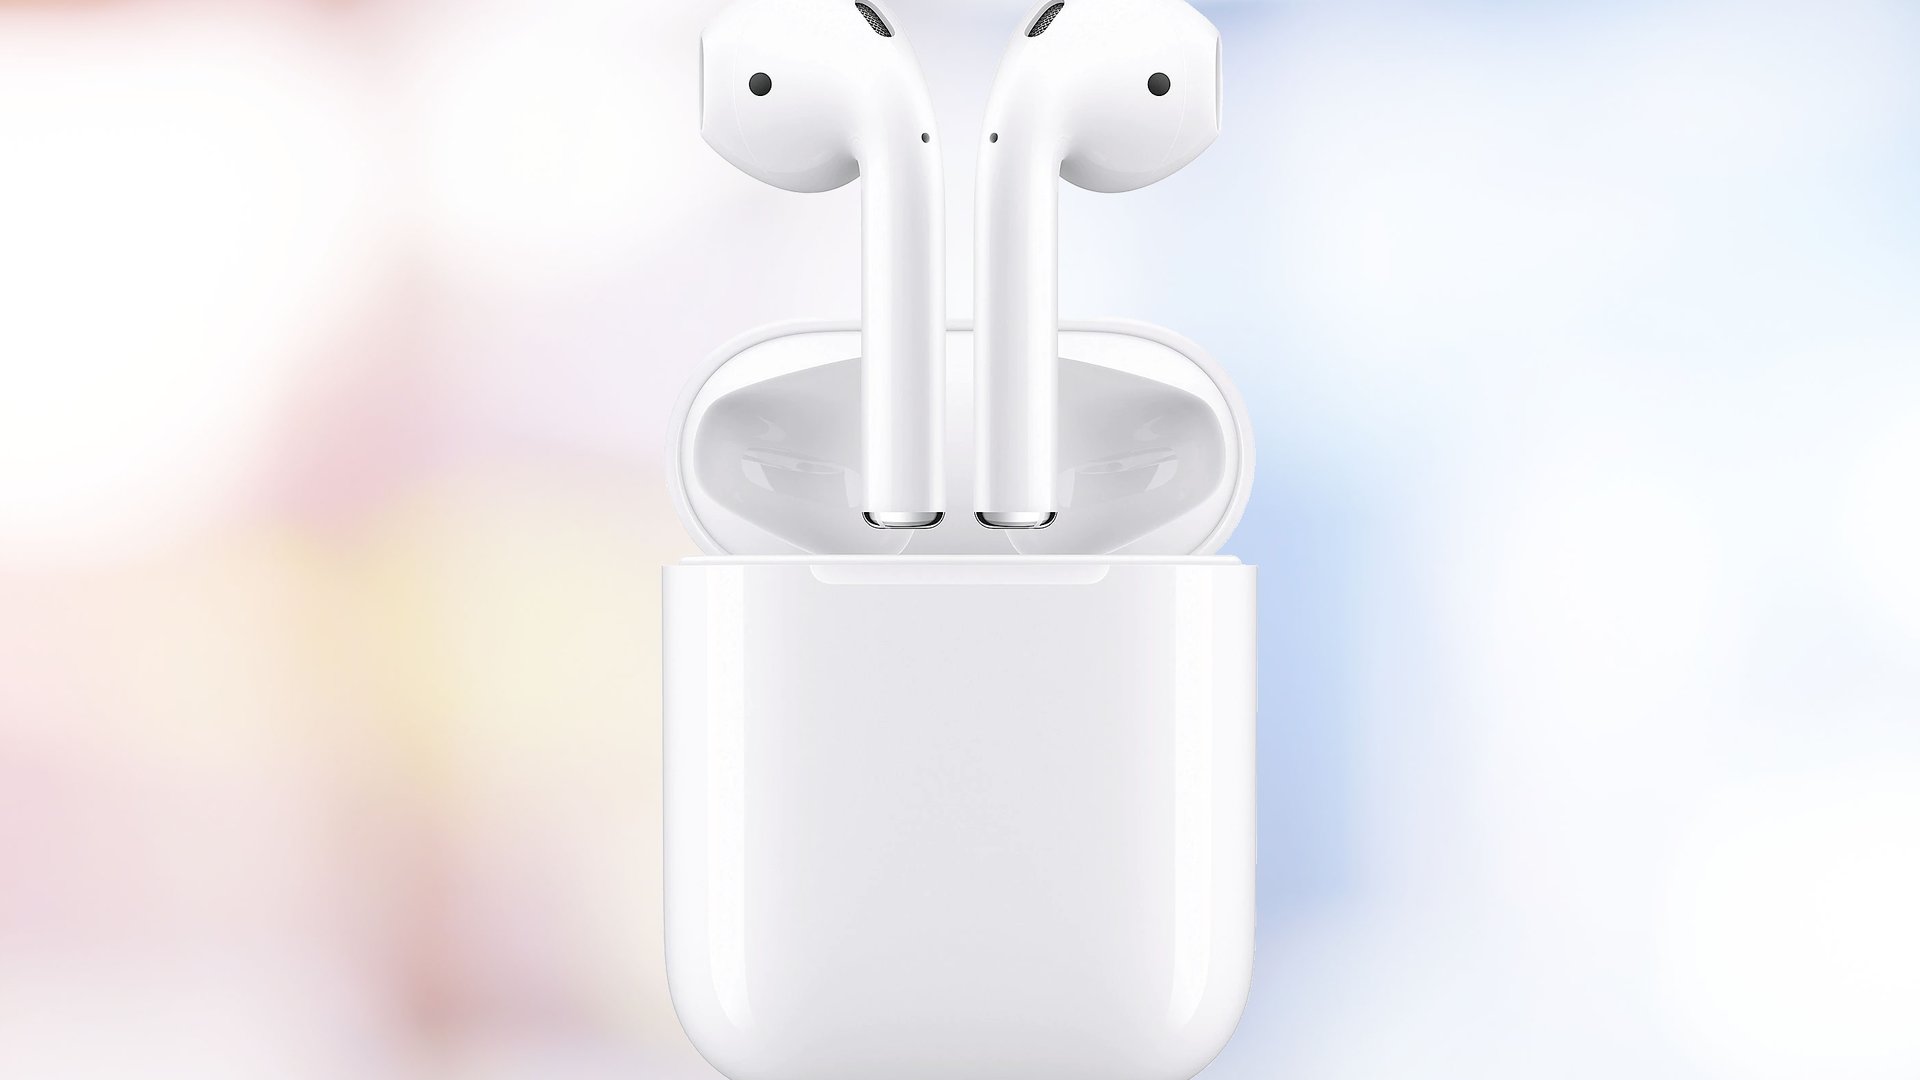 Airpods green. Apple AIRPODS 2. Apple AIRPODS 3rd Generation. Apple Earpods 3. Apple AIRPODS 2.2.